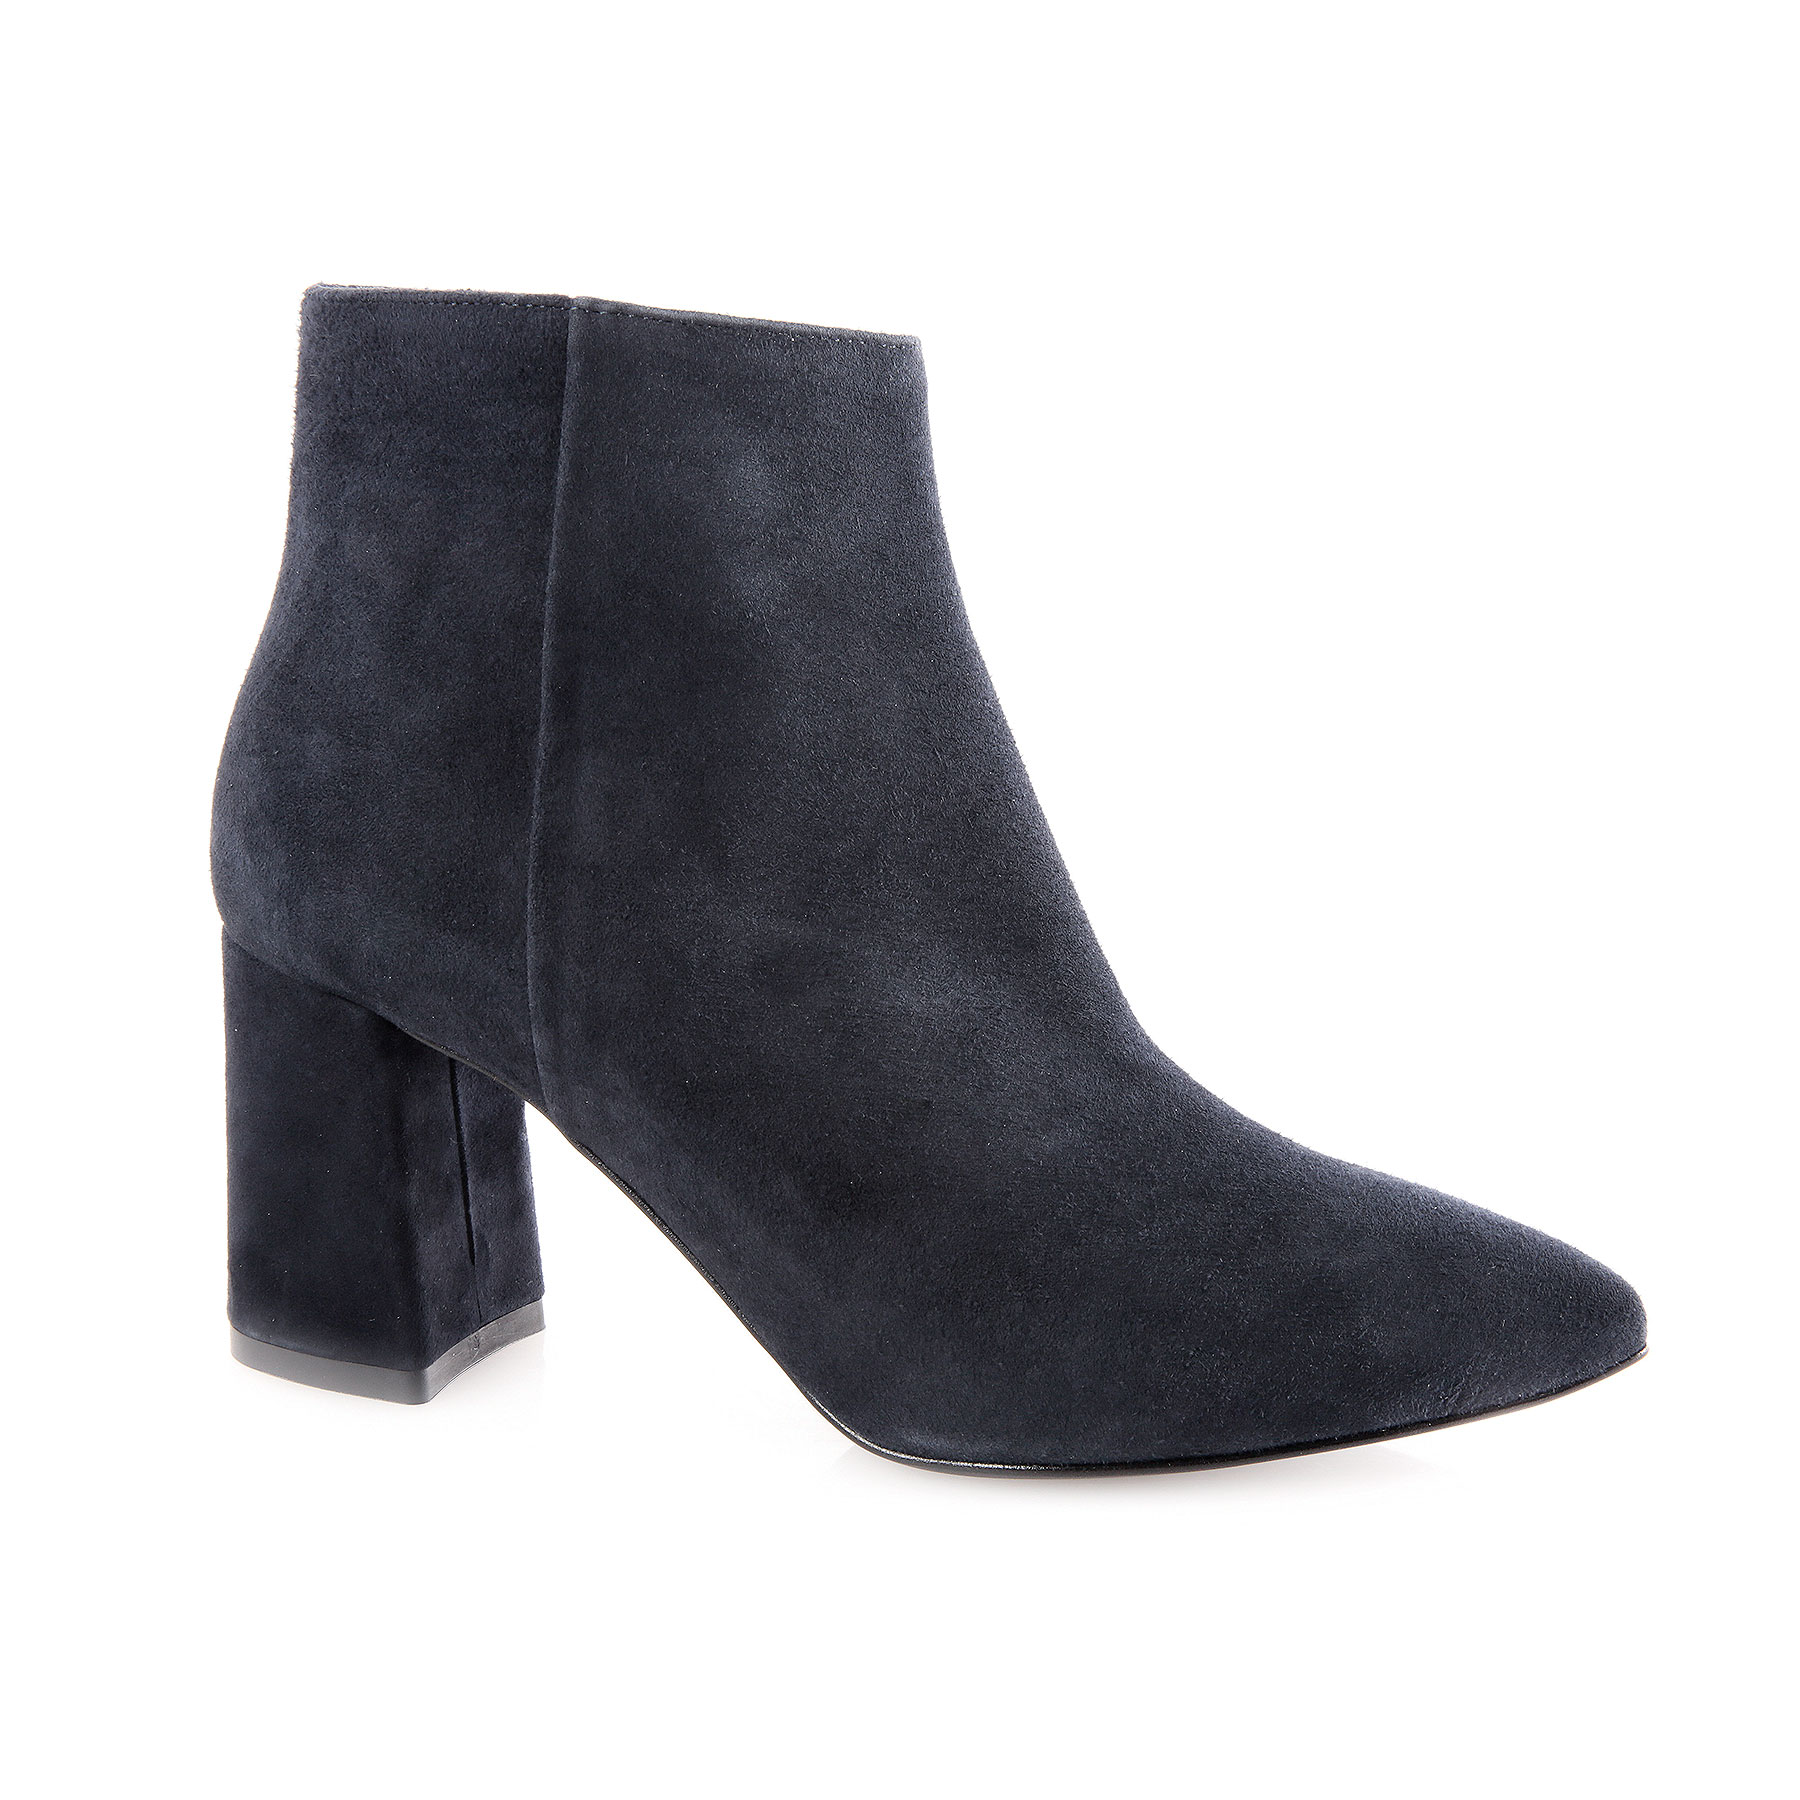 navy high heel ankle boots